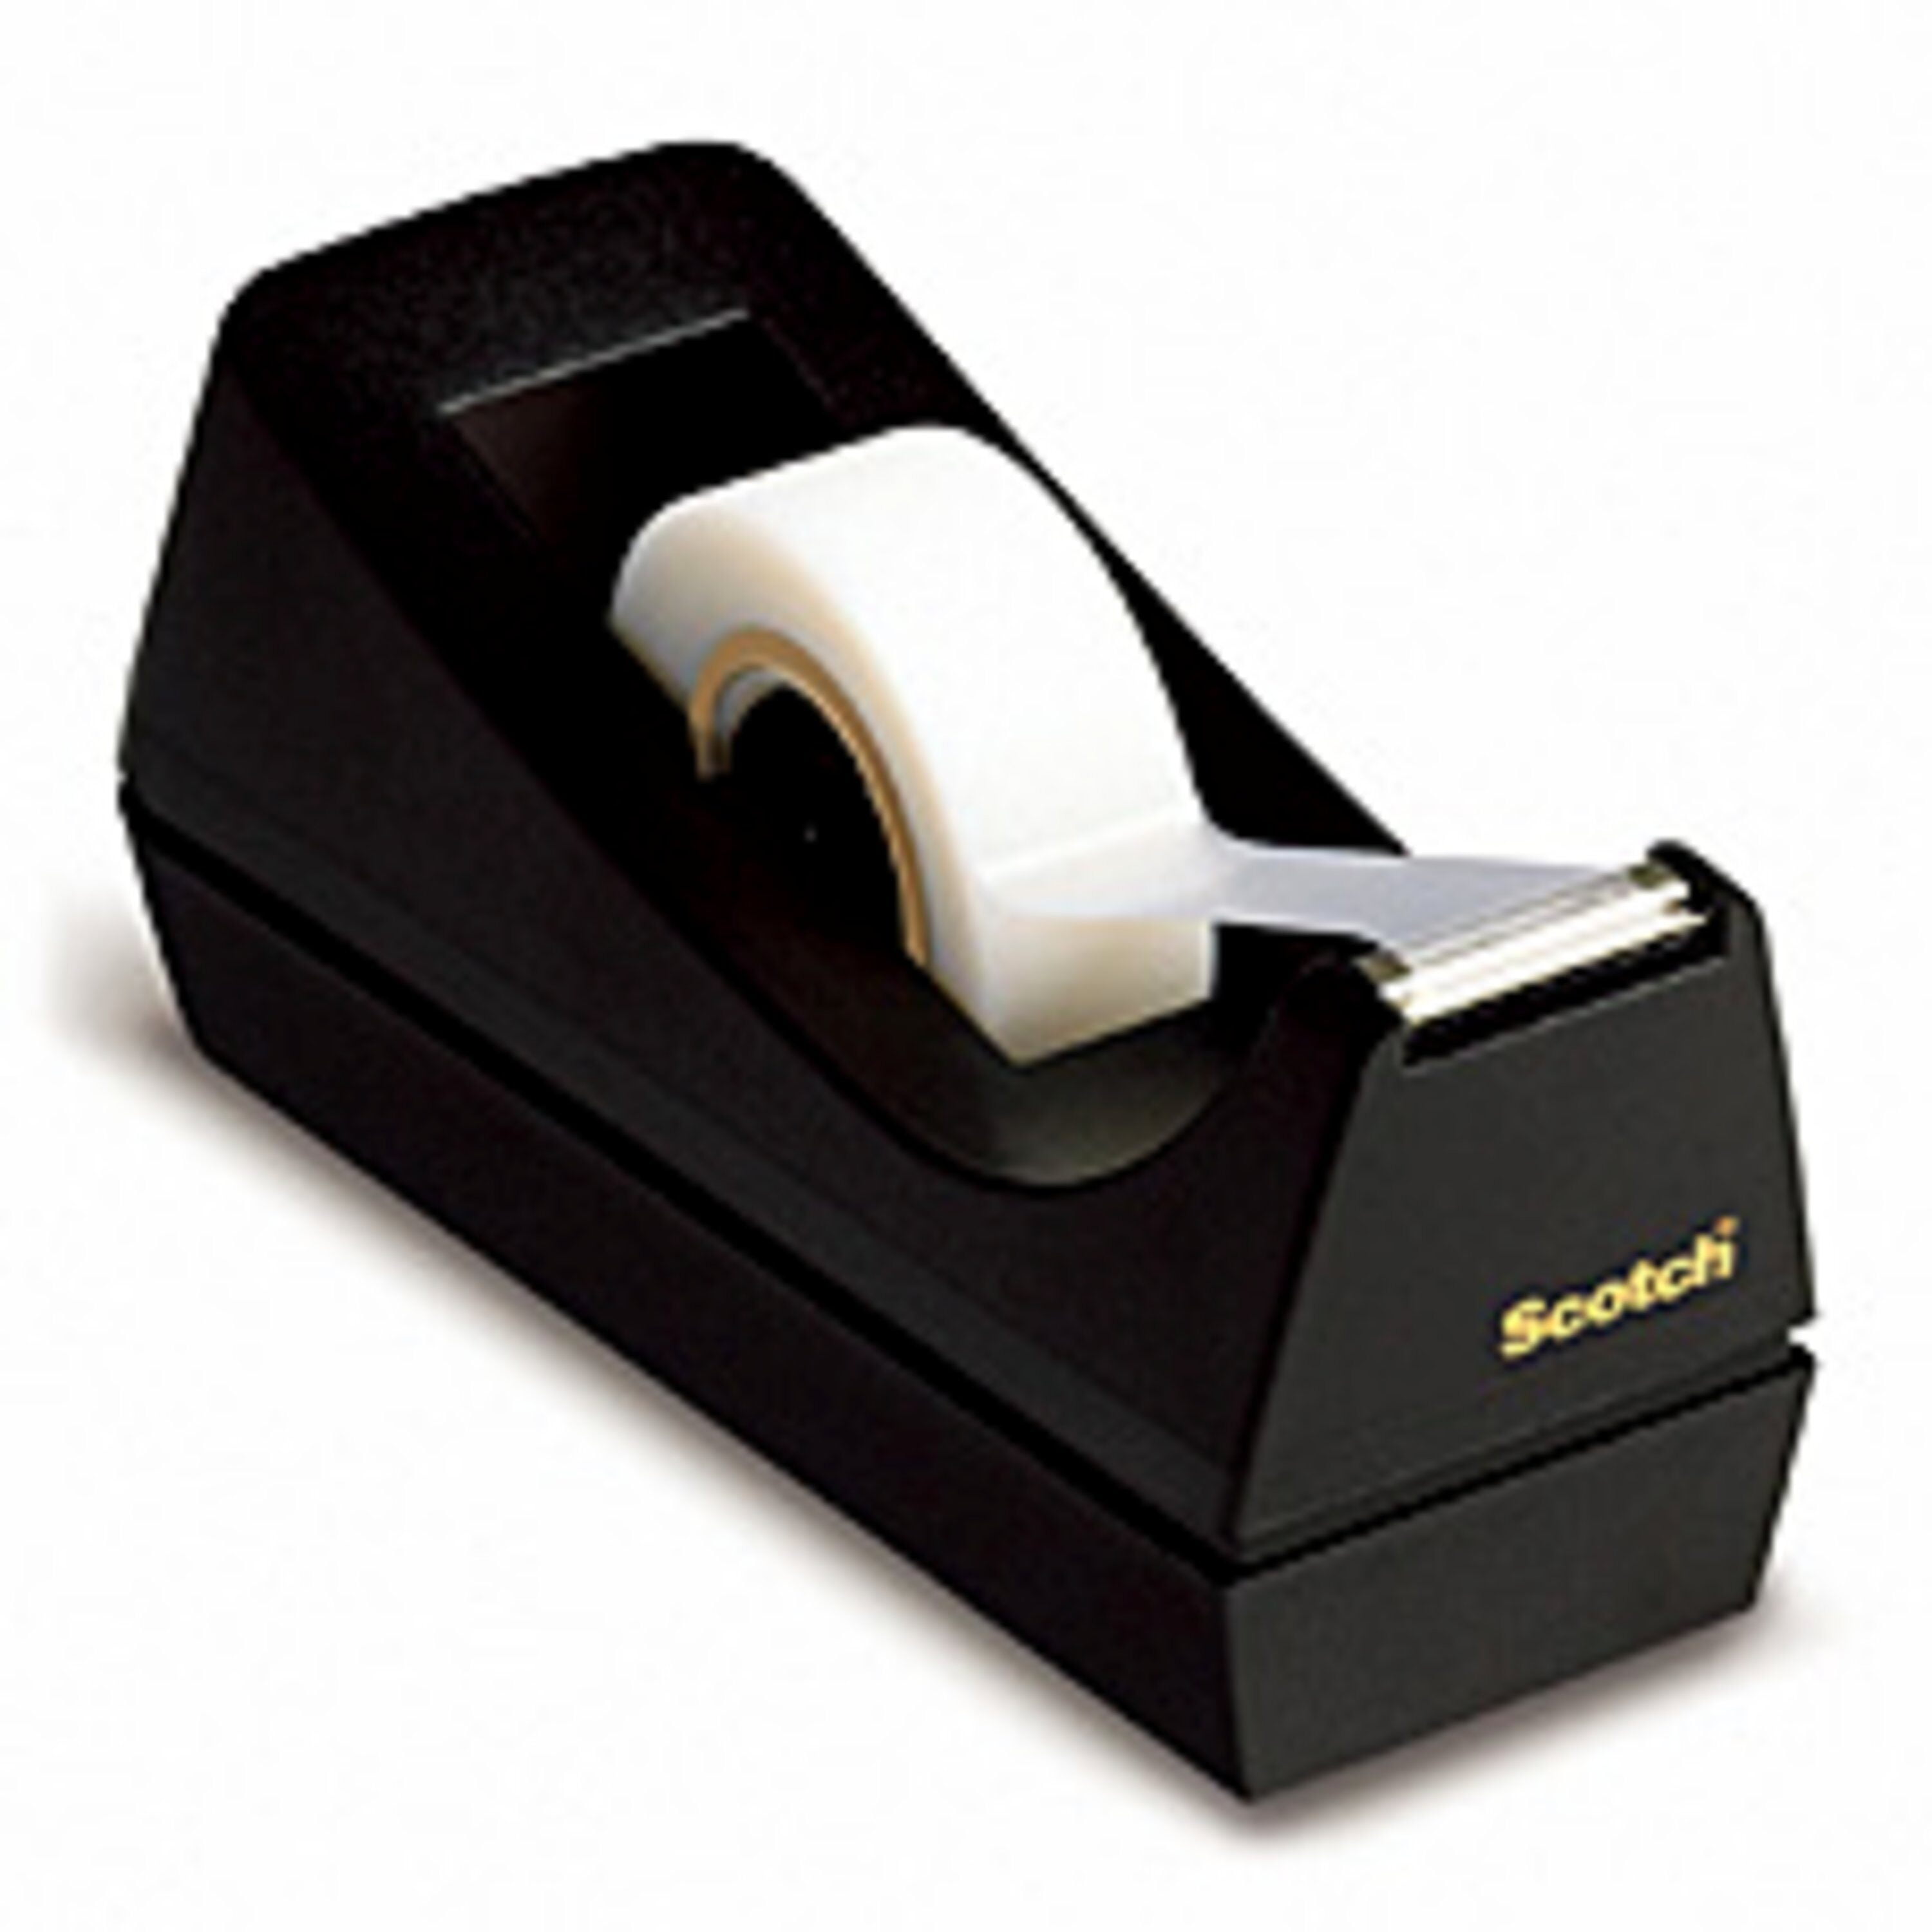 Manaloom Desktop Tape Dispenser - Non-Skid Base - Weighted Tape Roll Dispenser - Perfect for Office Home School (Tape Not Included) 2 Pack